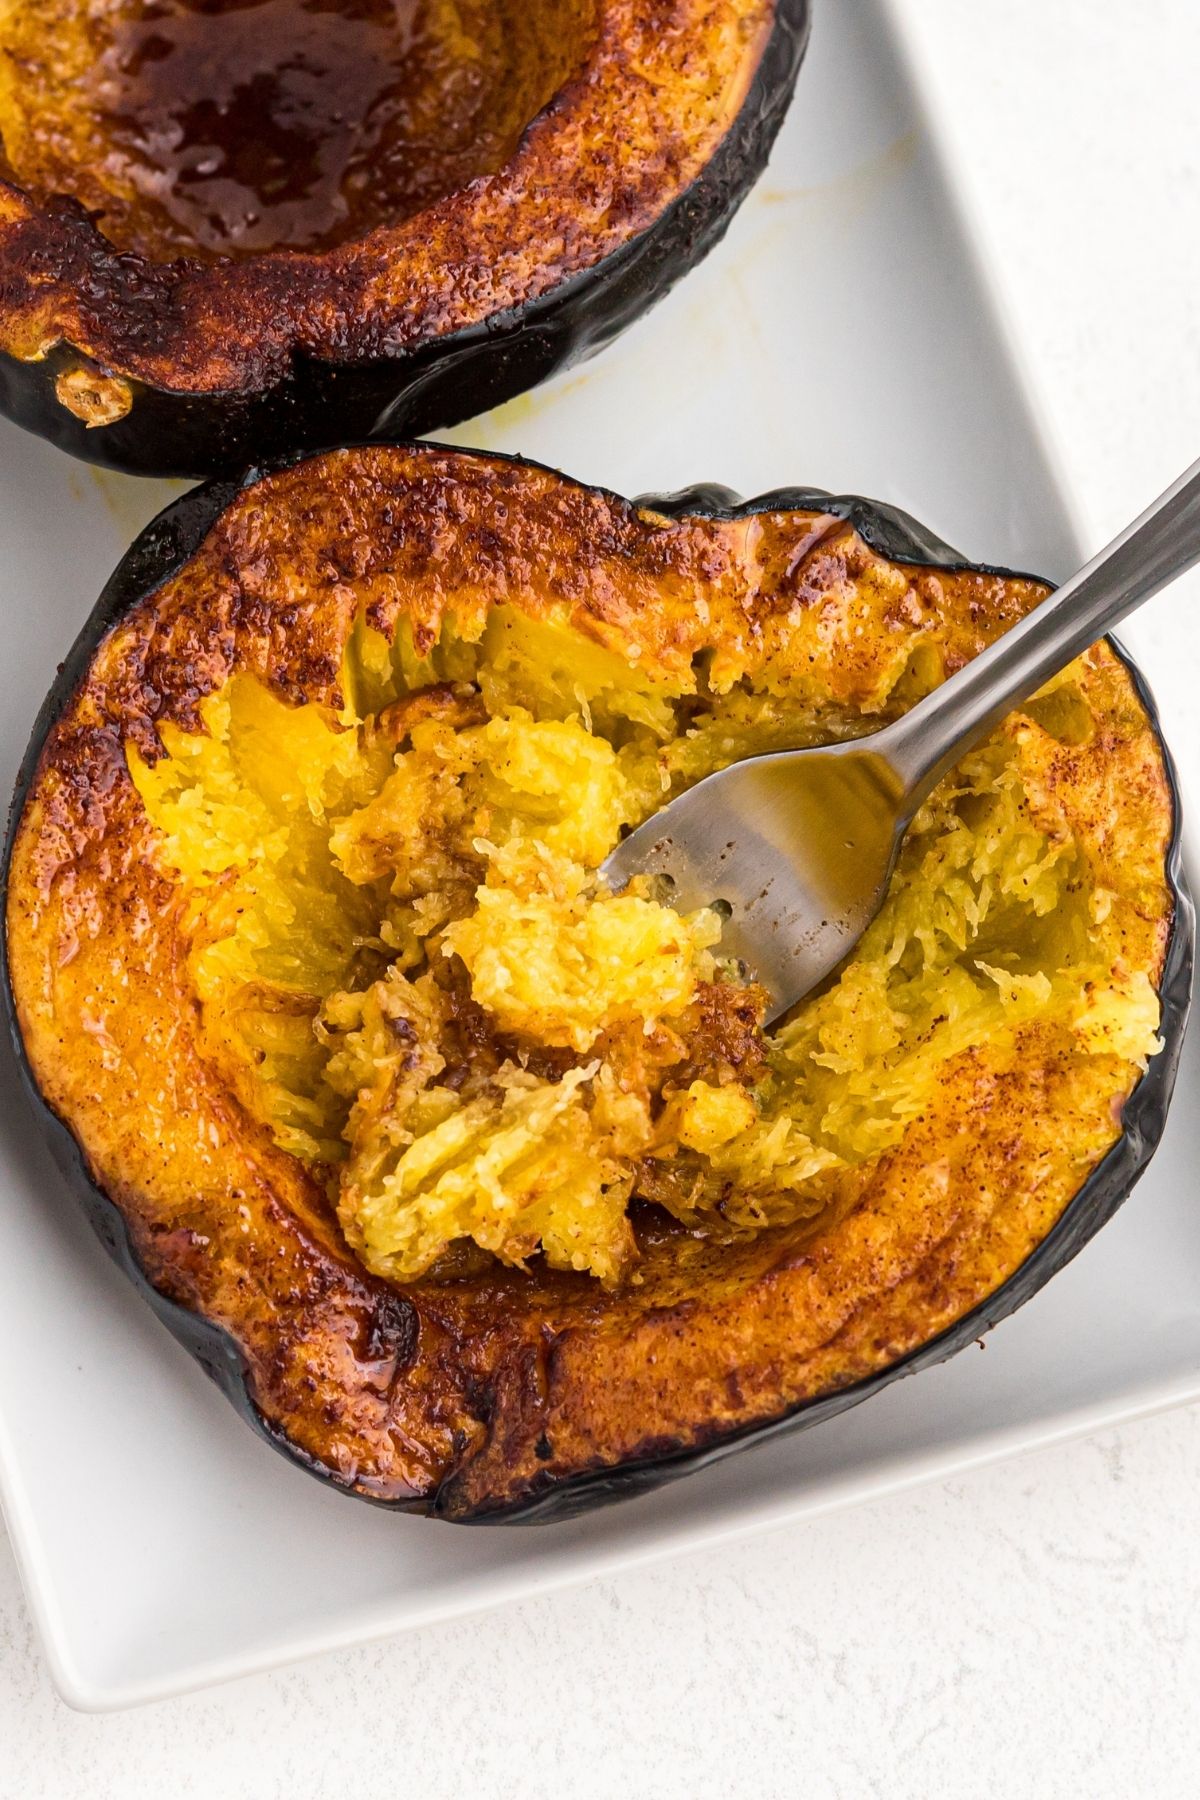 Golden cooked acorn squash on a white plate with a fork bite in the center of the squash.